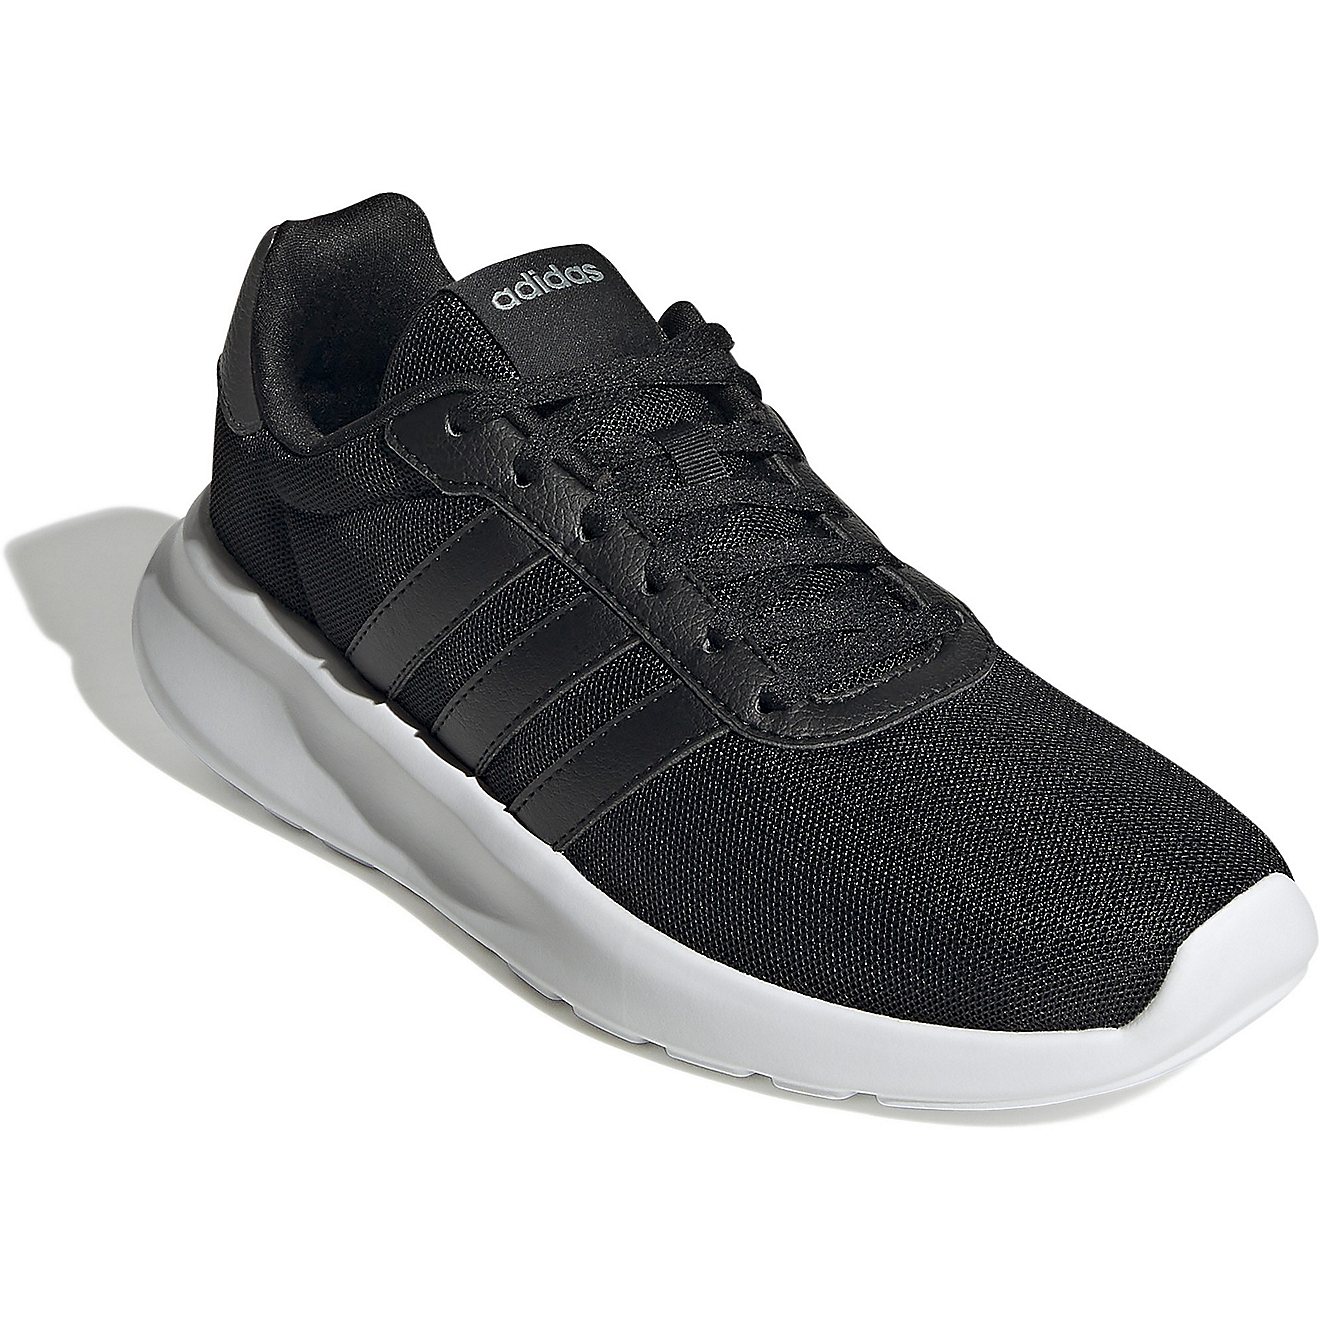 adidas Women's Lite Racer 3.0 Running Shoes                                                                                      - view number 3